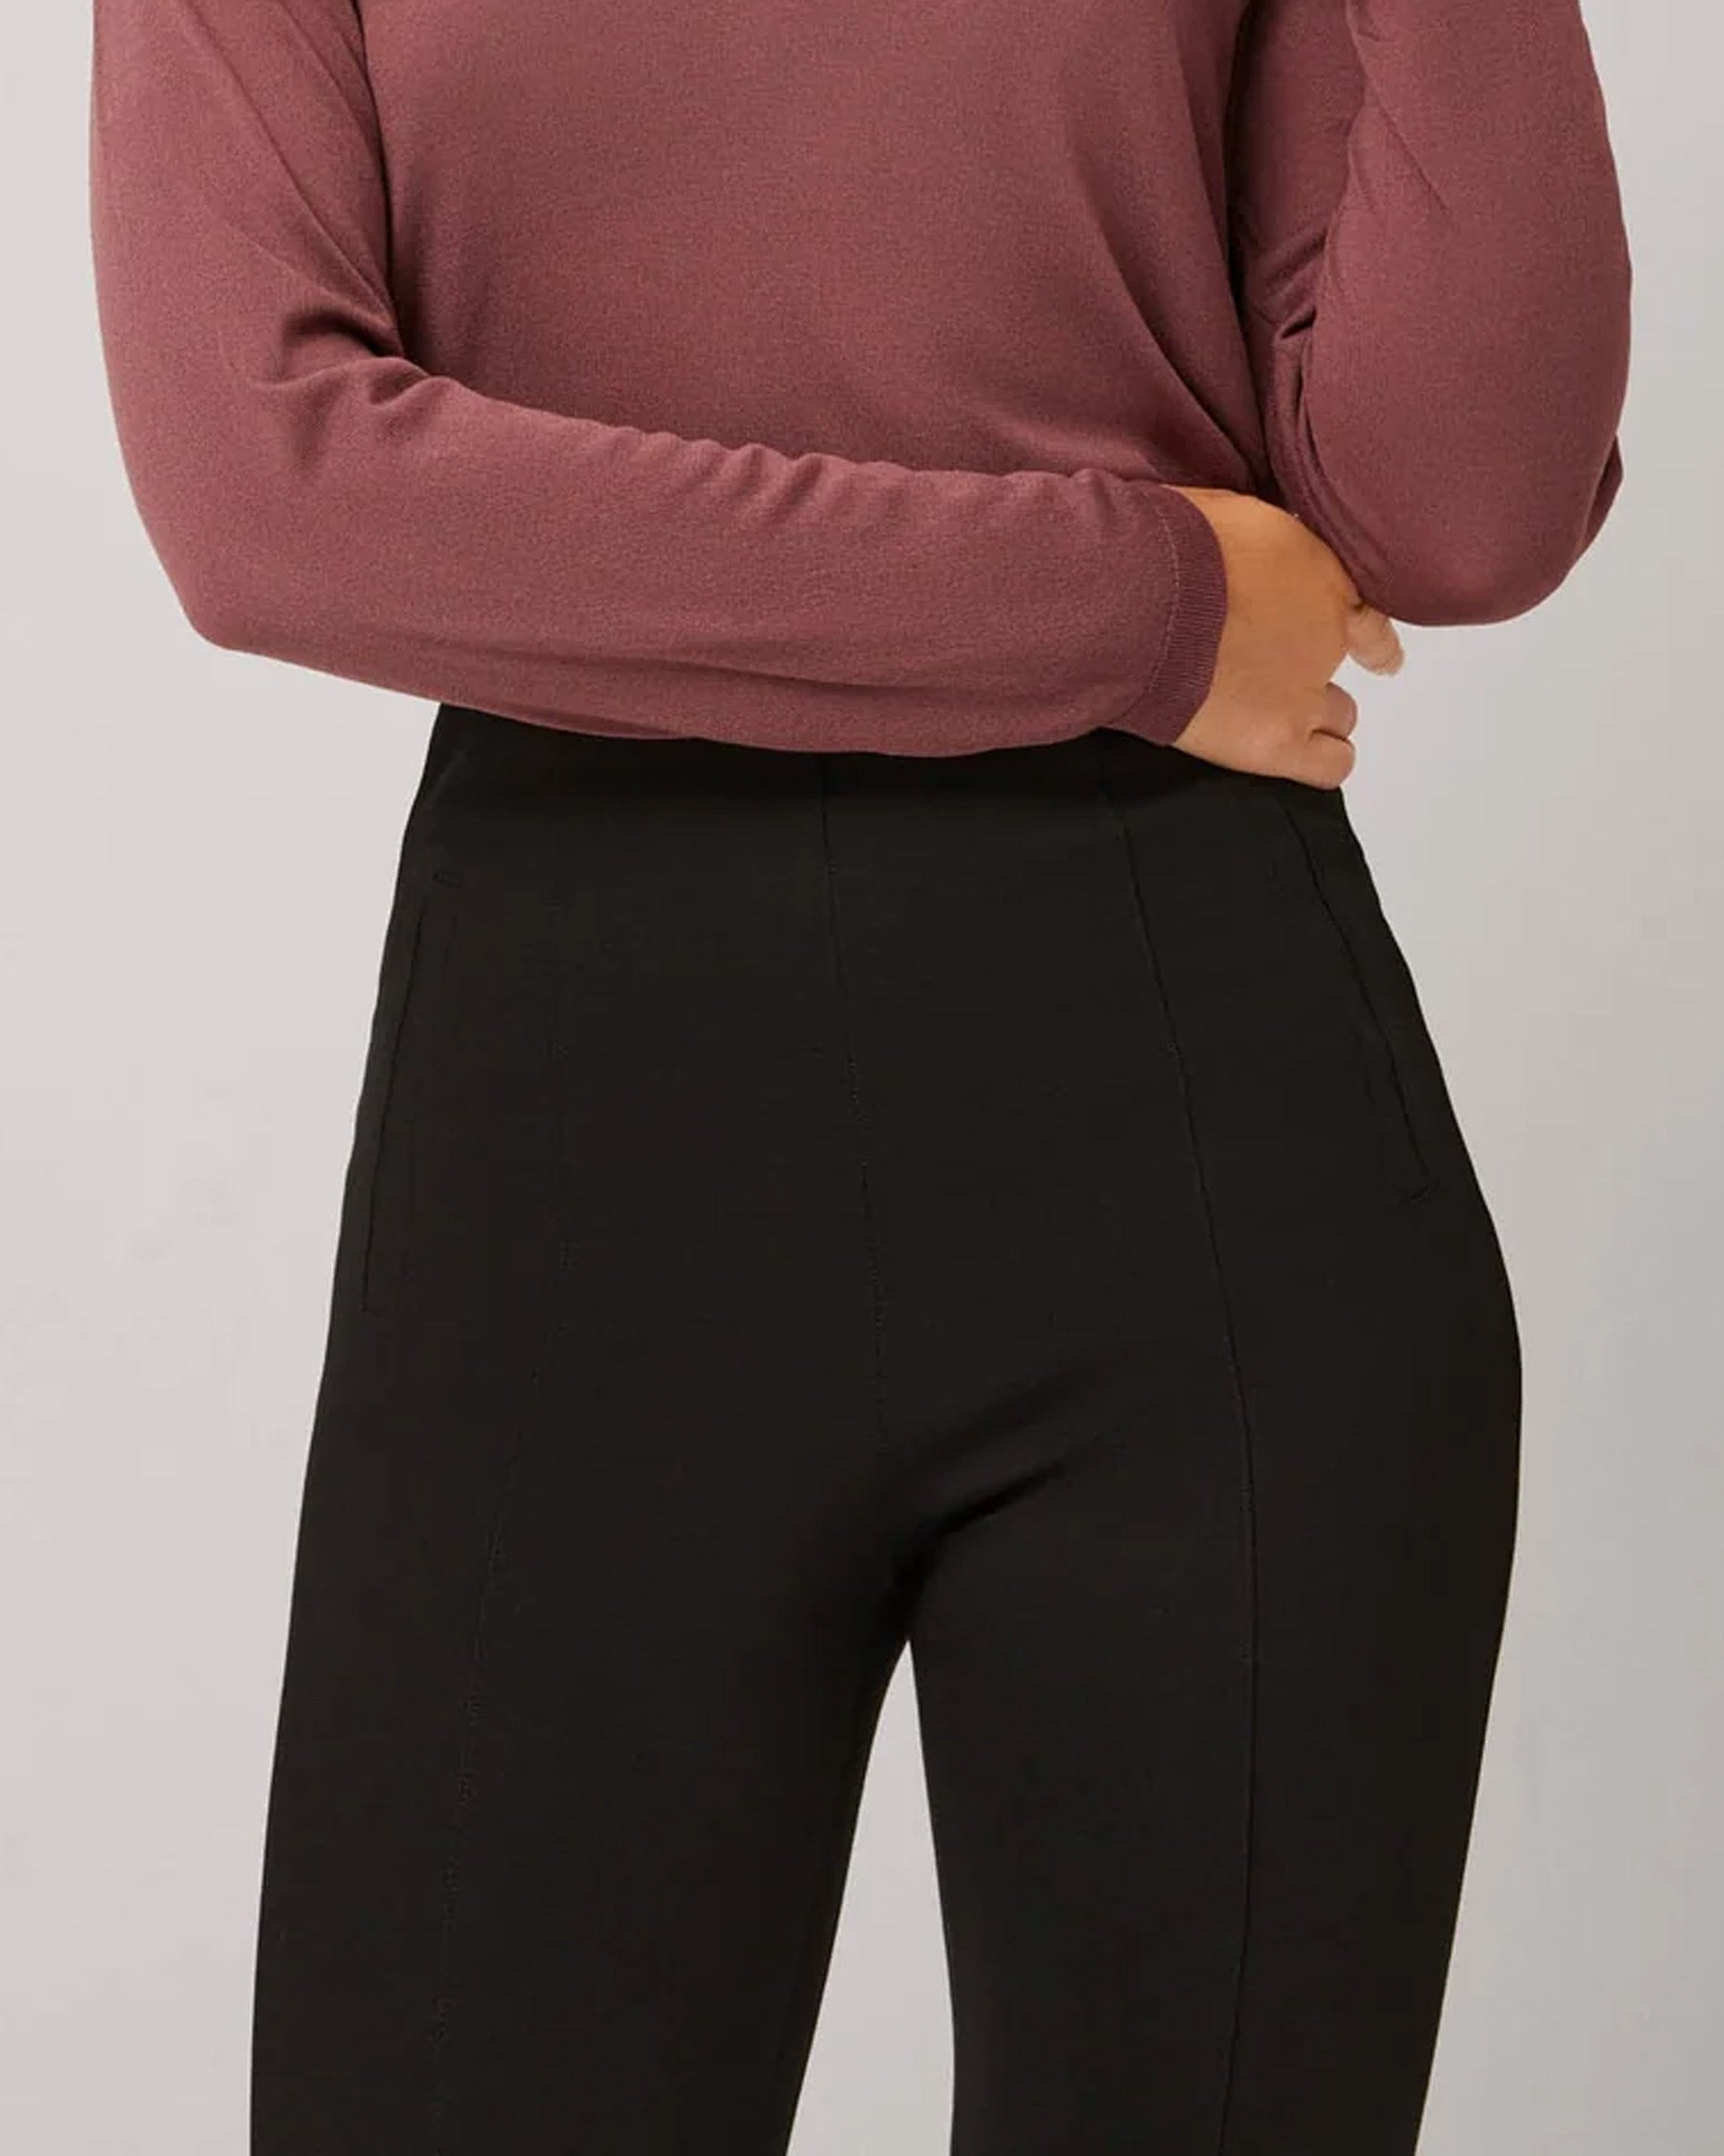 Ysabel Mora 70290 High Rise Treggings - Black high waisted trouser leggings (treggings) with shaped darted waist and centre seams down the front of the leg.